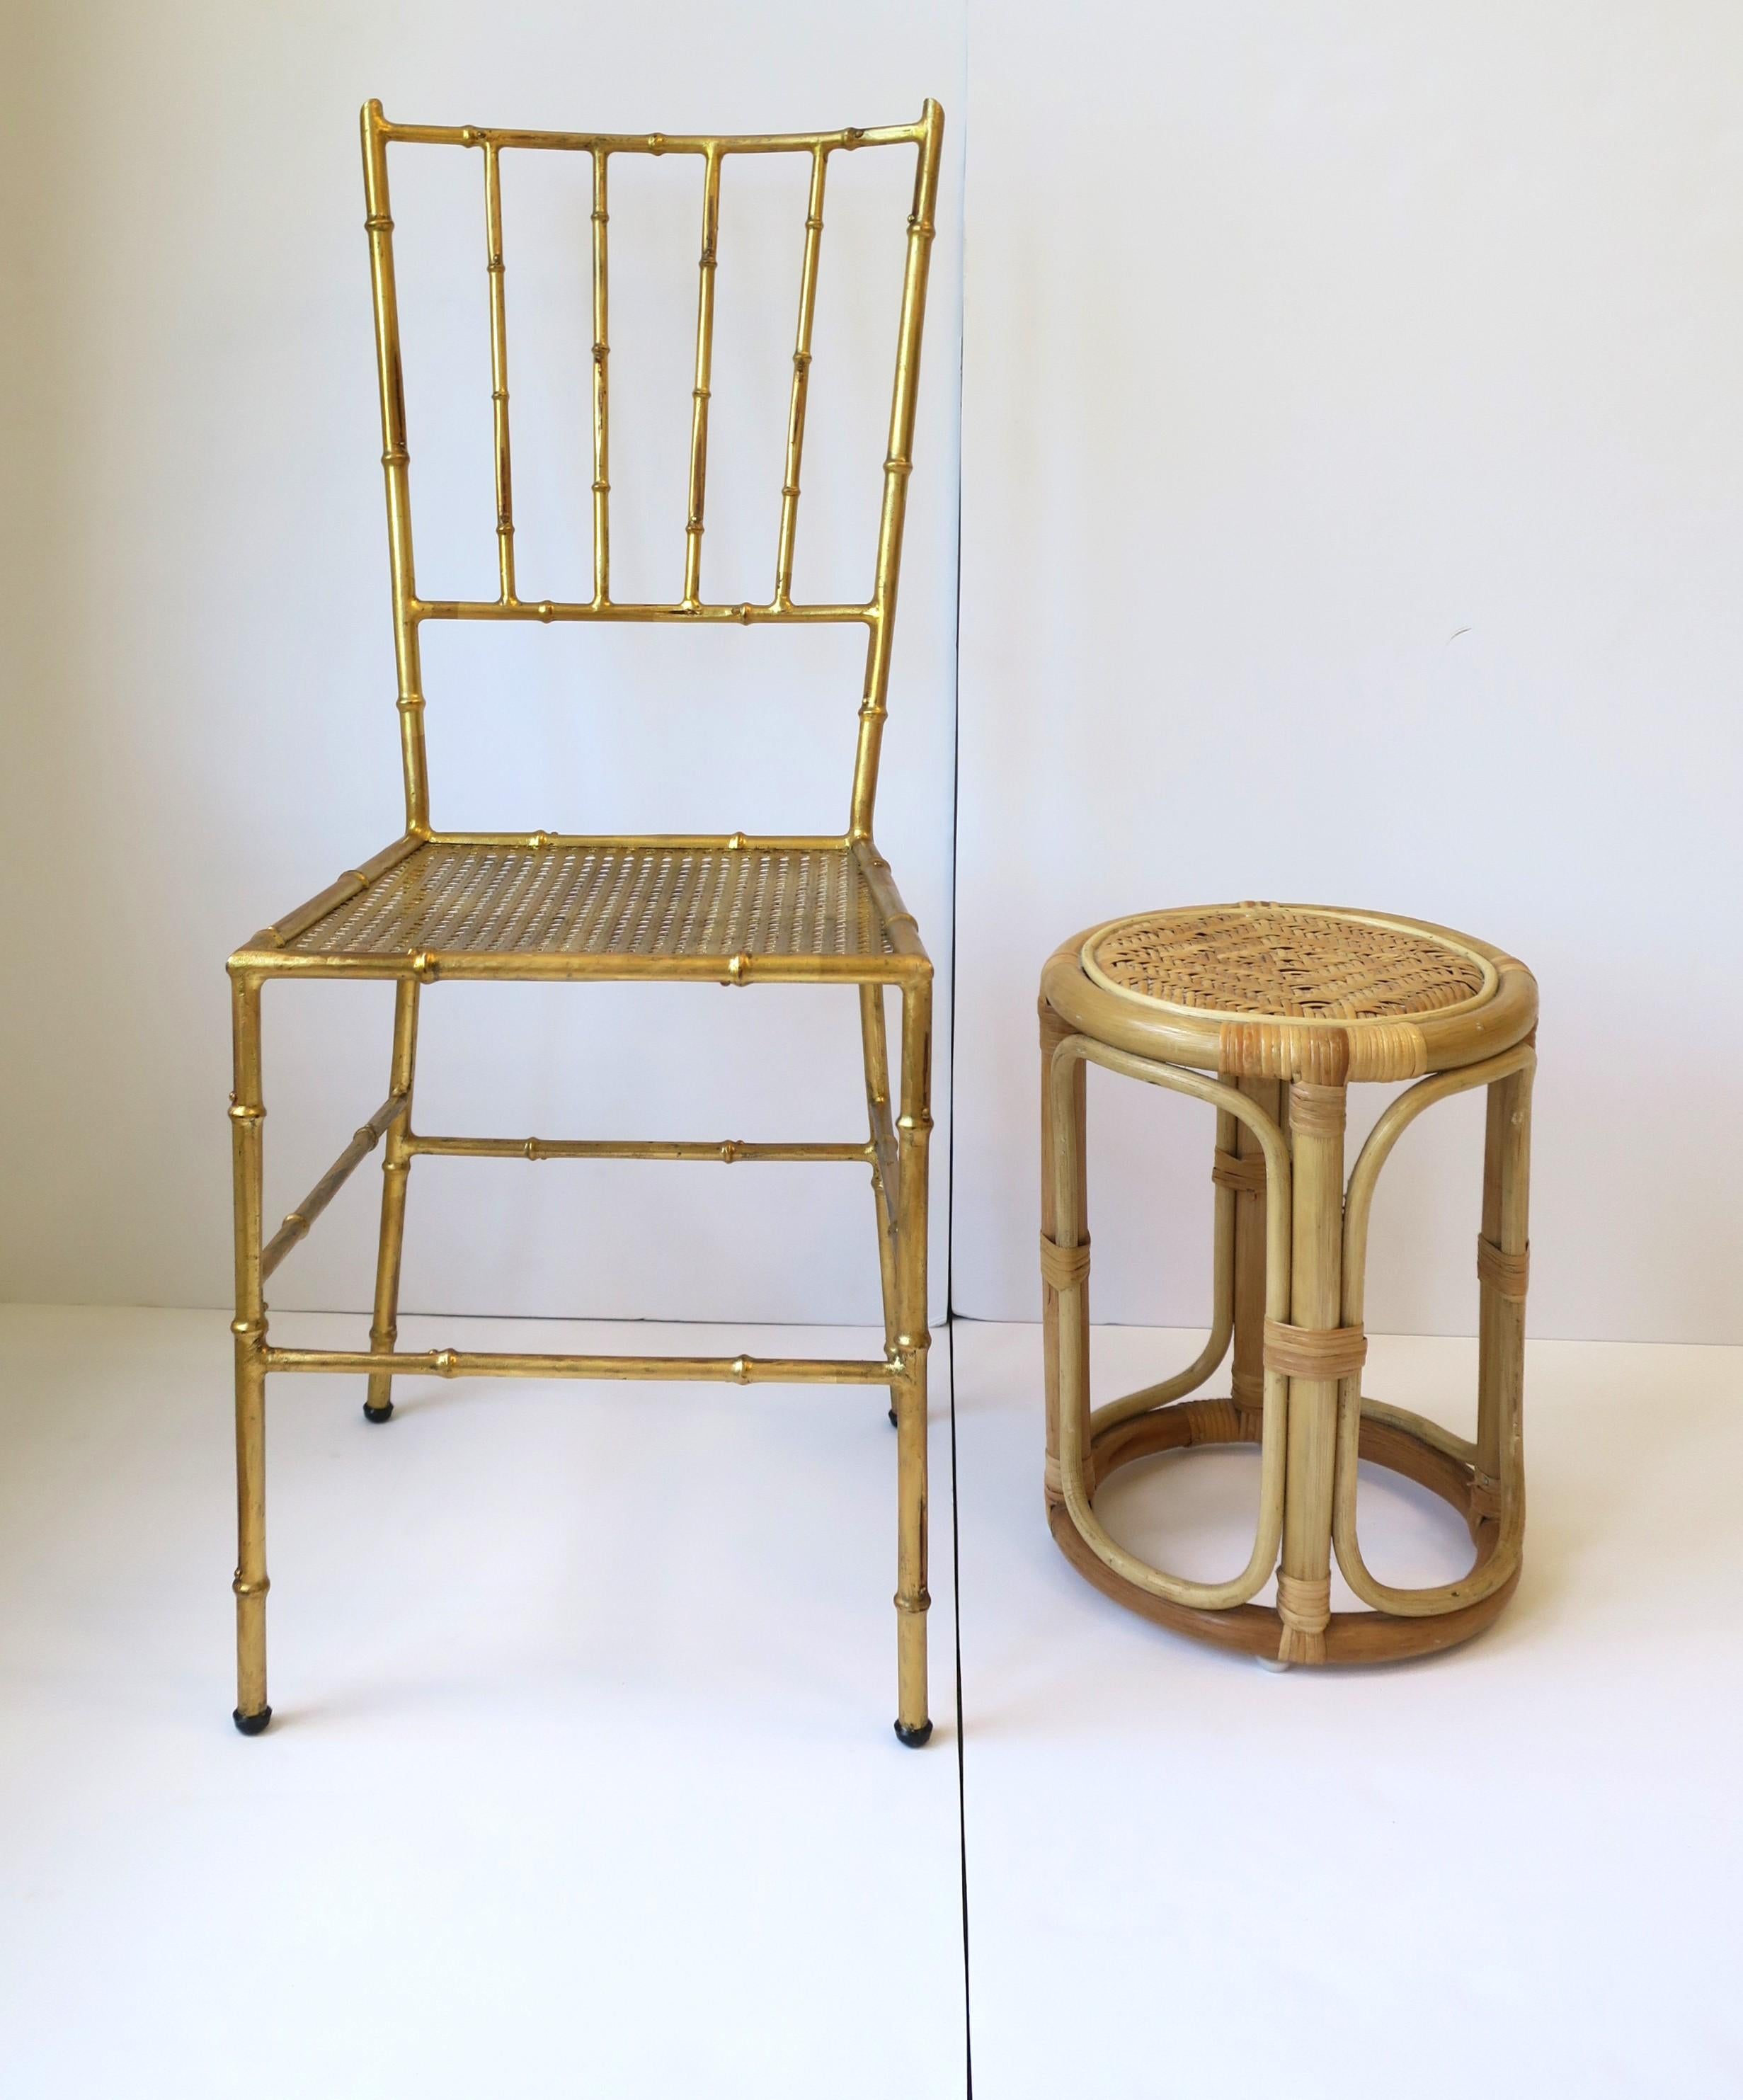 Italian Gold Metal Cane and Bamboo-Esque Desk, Dining or Side Chair For Sale 4